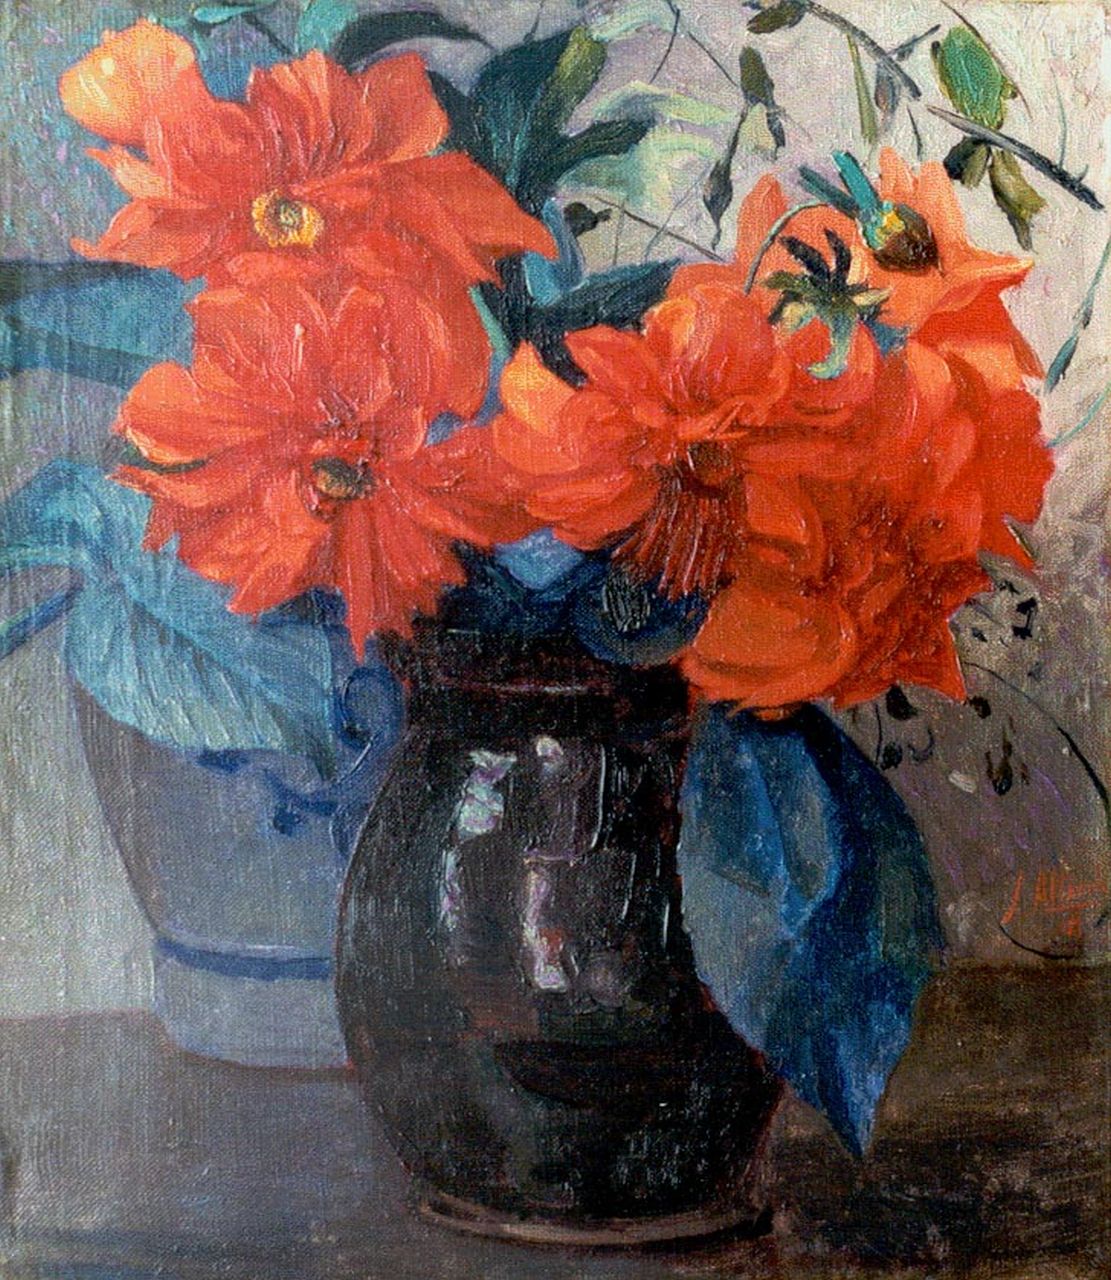 Altink J.  | Jan Altink, Still life with dahlias, oil on canvas 39.2 x 34.5 cm, signed l.r. and dated '18